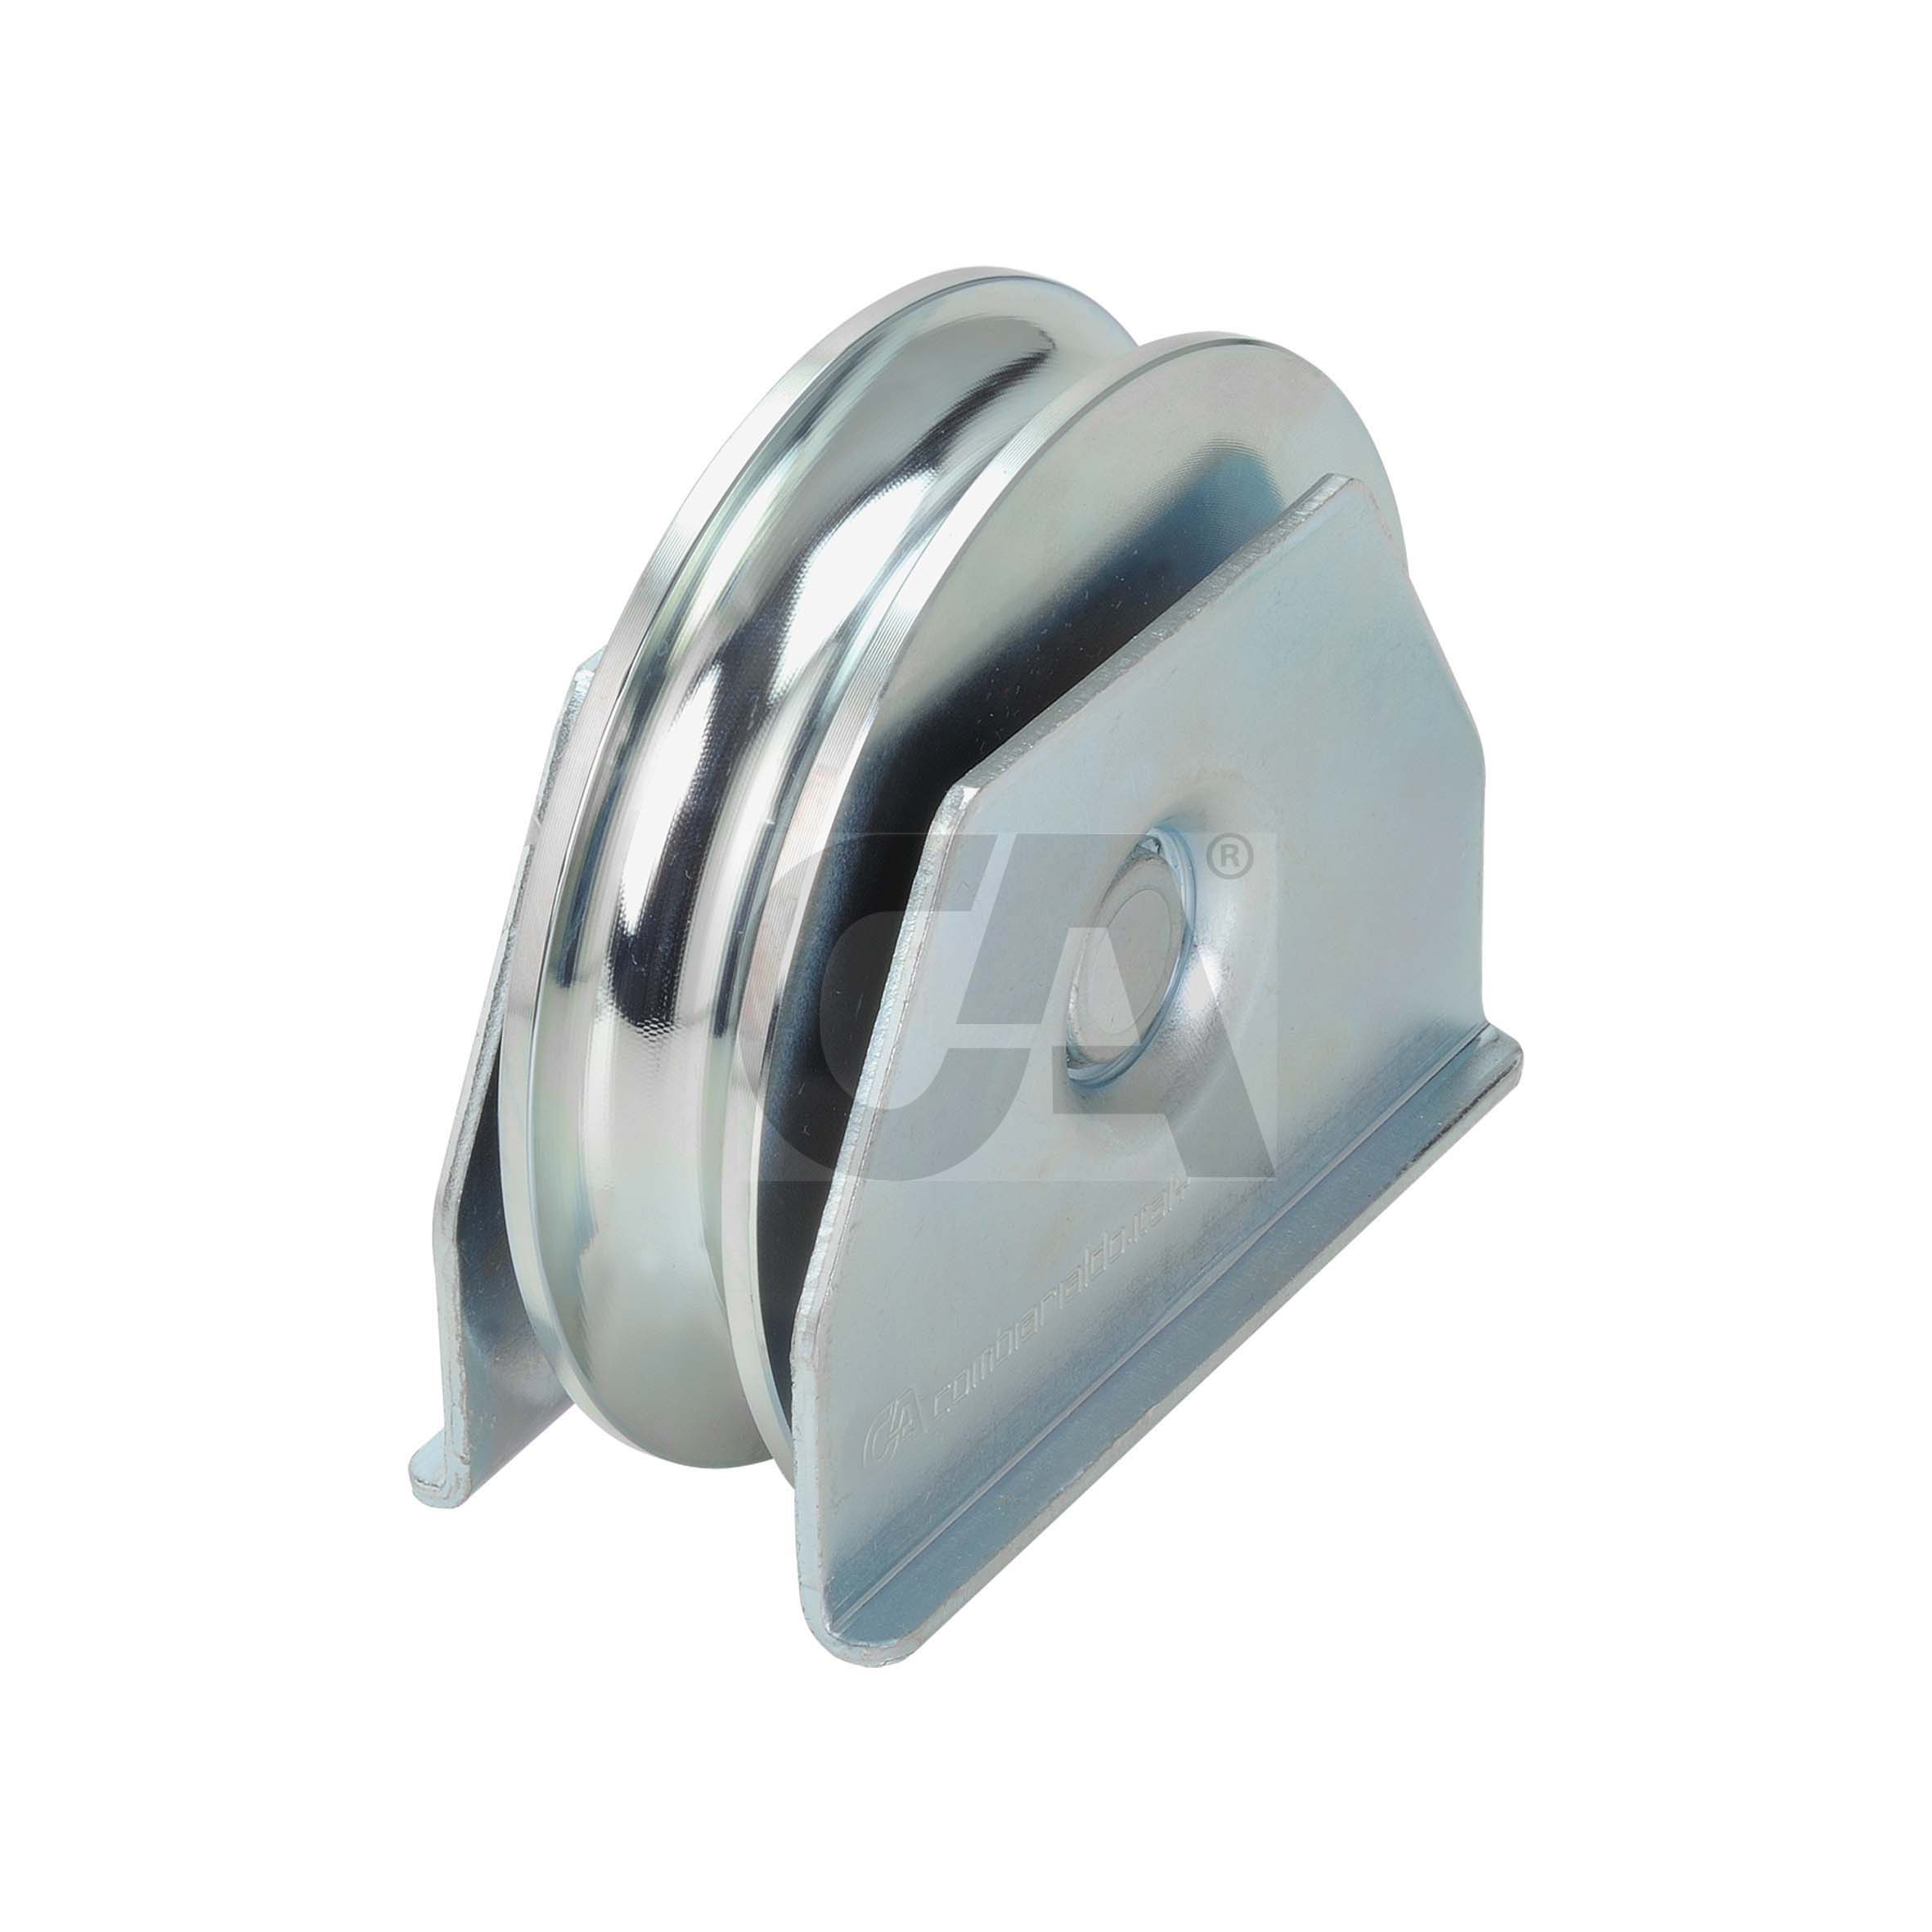 Double Bearing Sliding Gate Wheels with side support